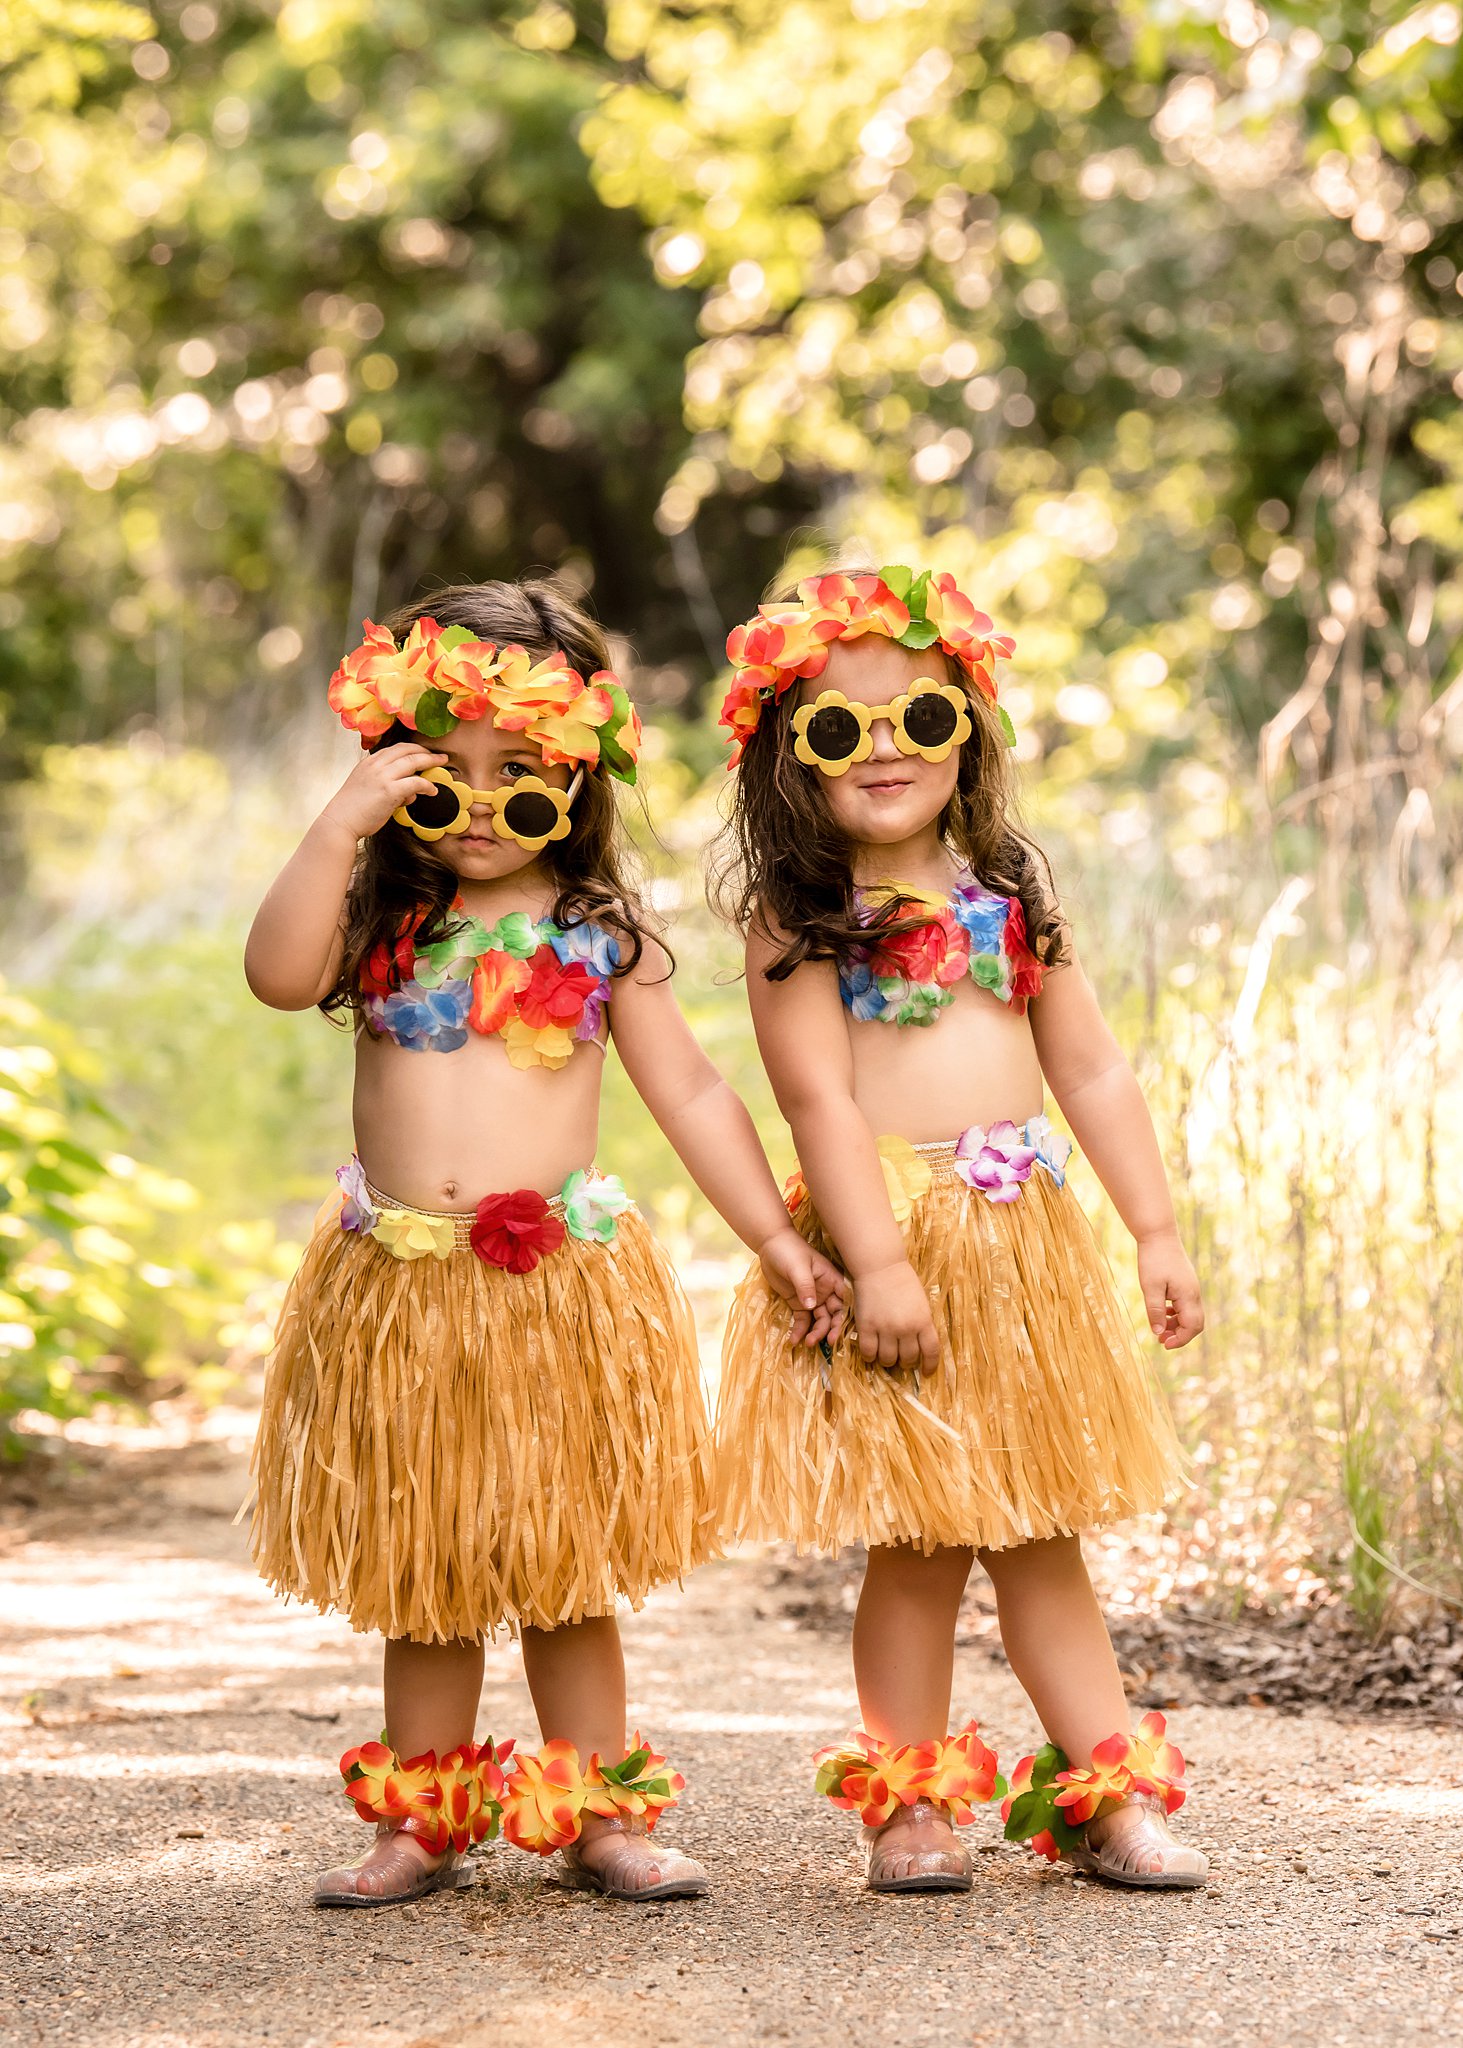 twins dressed for a Hawaiian luau stand holding hands in a park path Rock and Roll Ice Cream Parlor